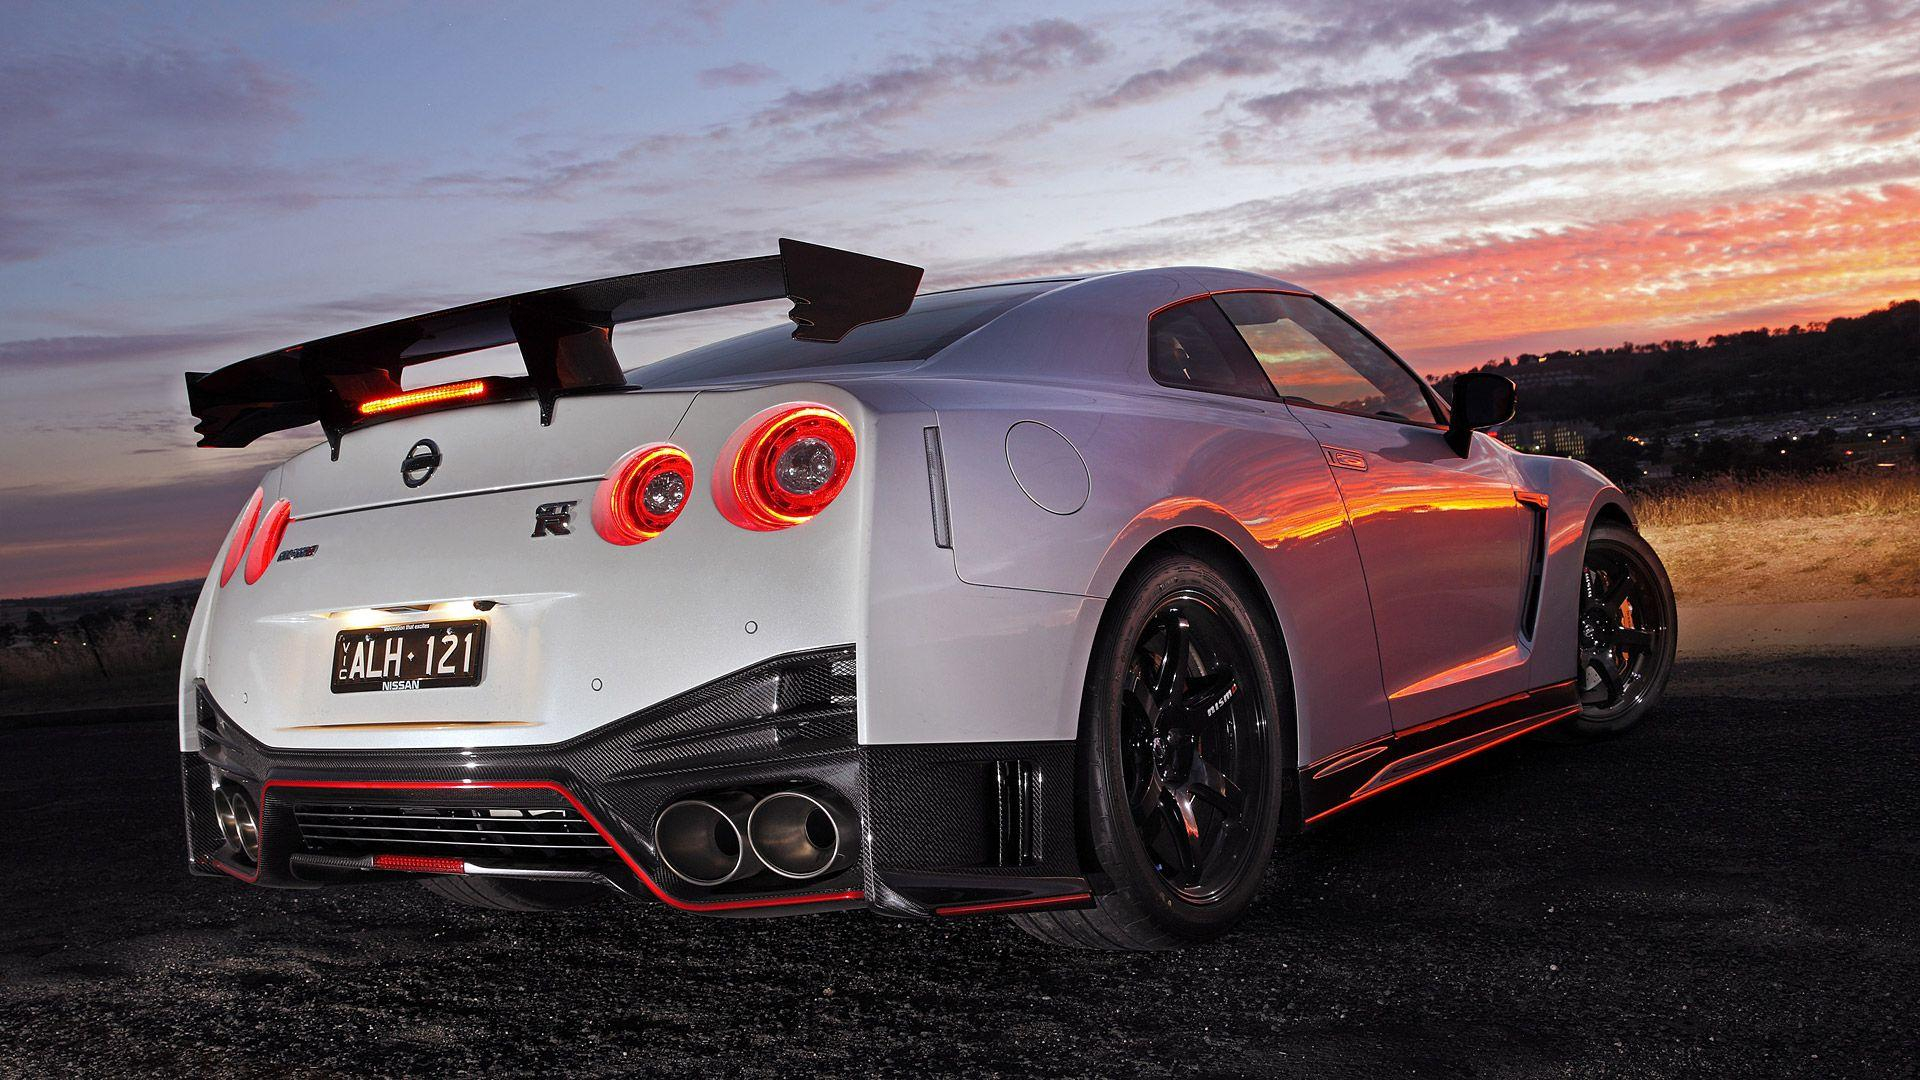 1920x1080 Nissan GT-R Nismo Wallpapers